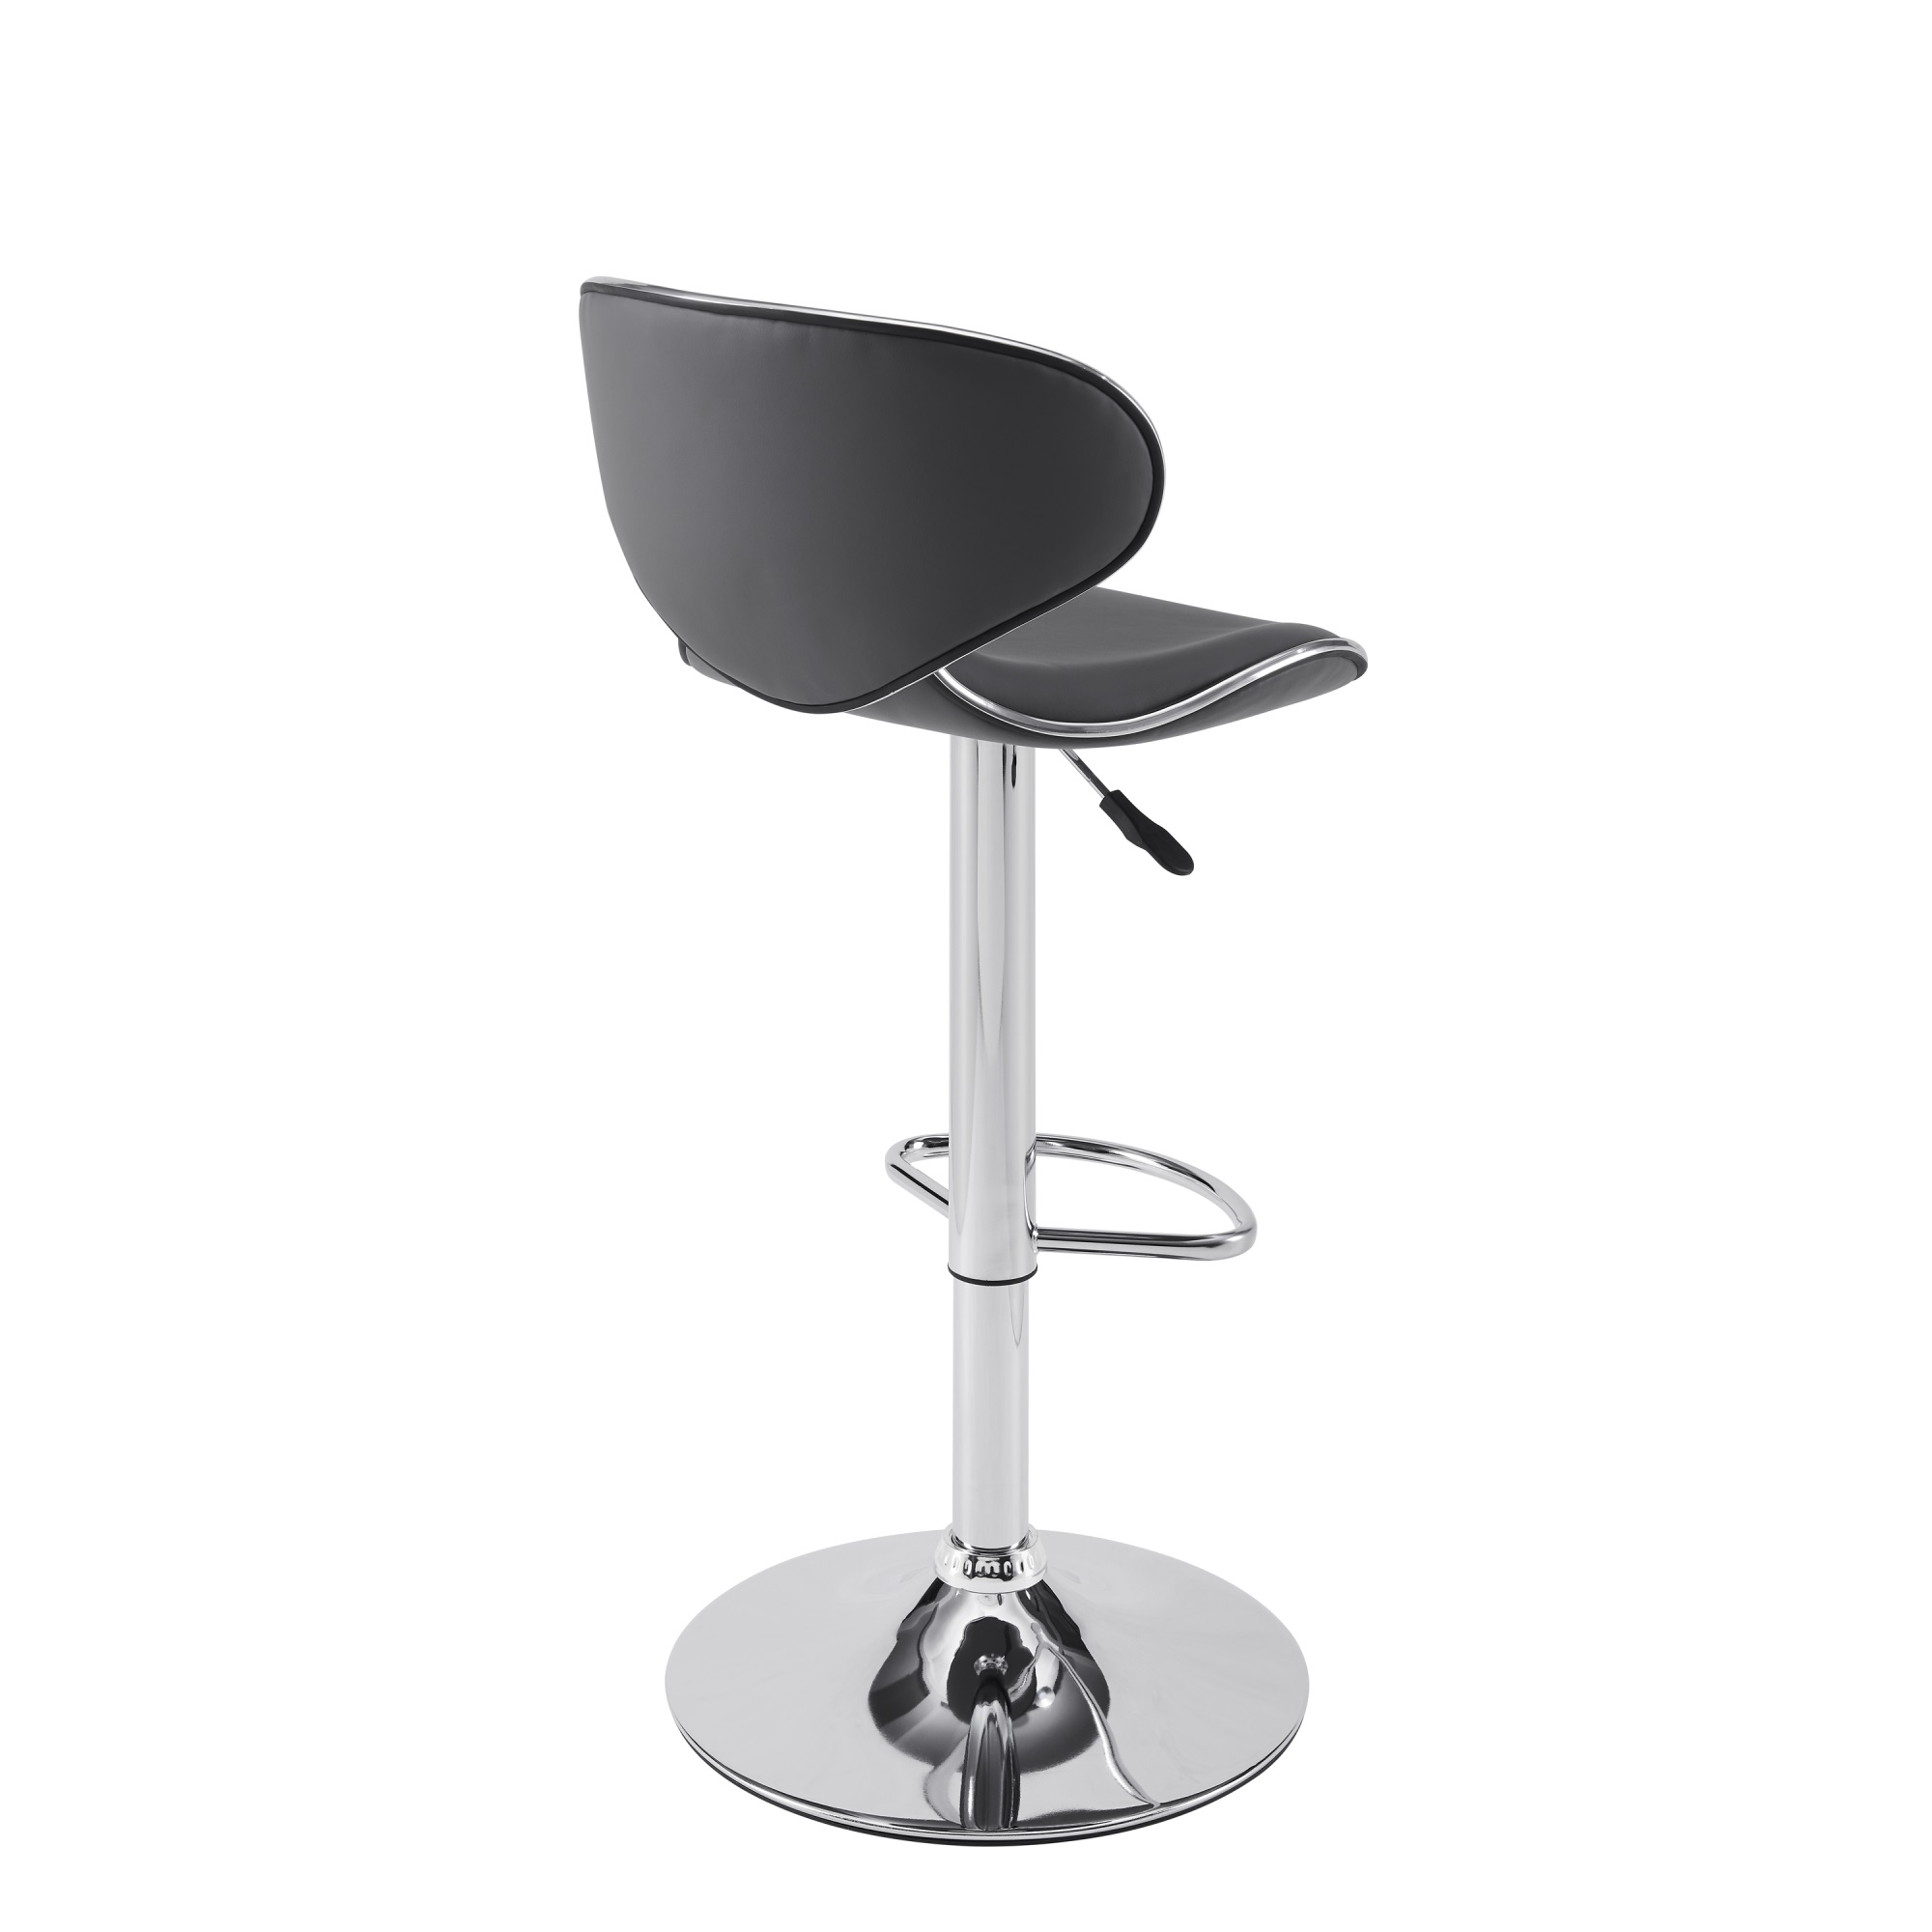 Powell Beldon 24-32" Indoor Adjustable Metal Bar Stool with Swivel, Gray Faux Leather - image 5 of 10